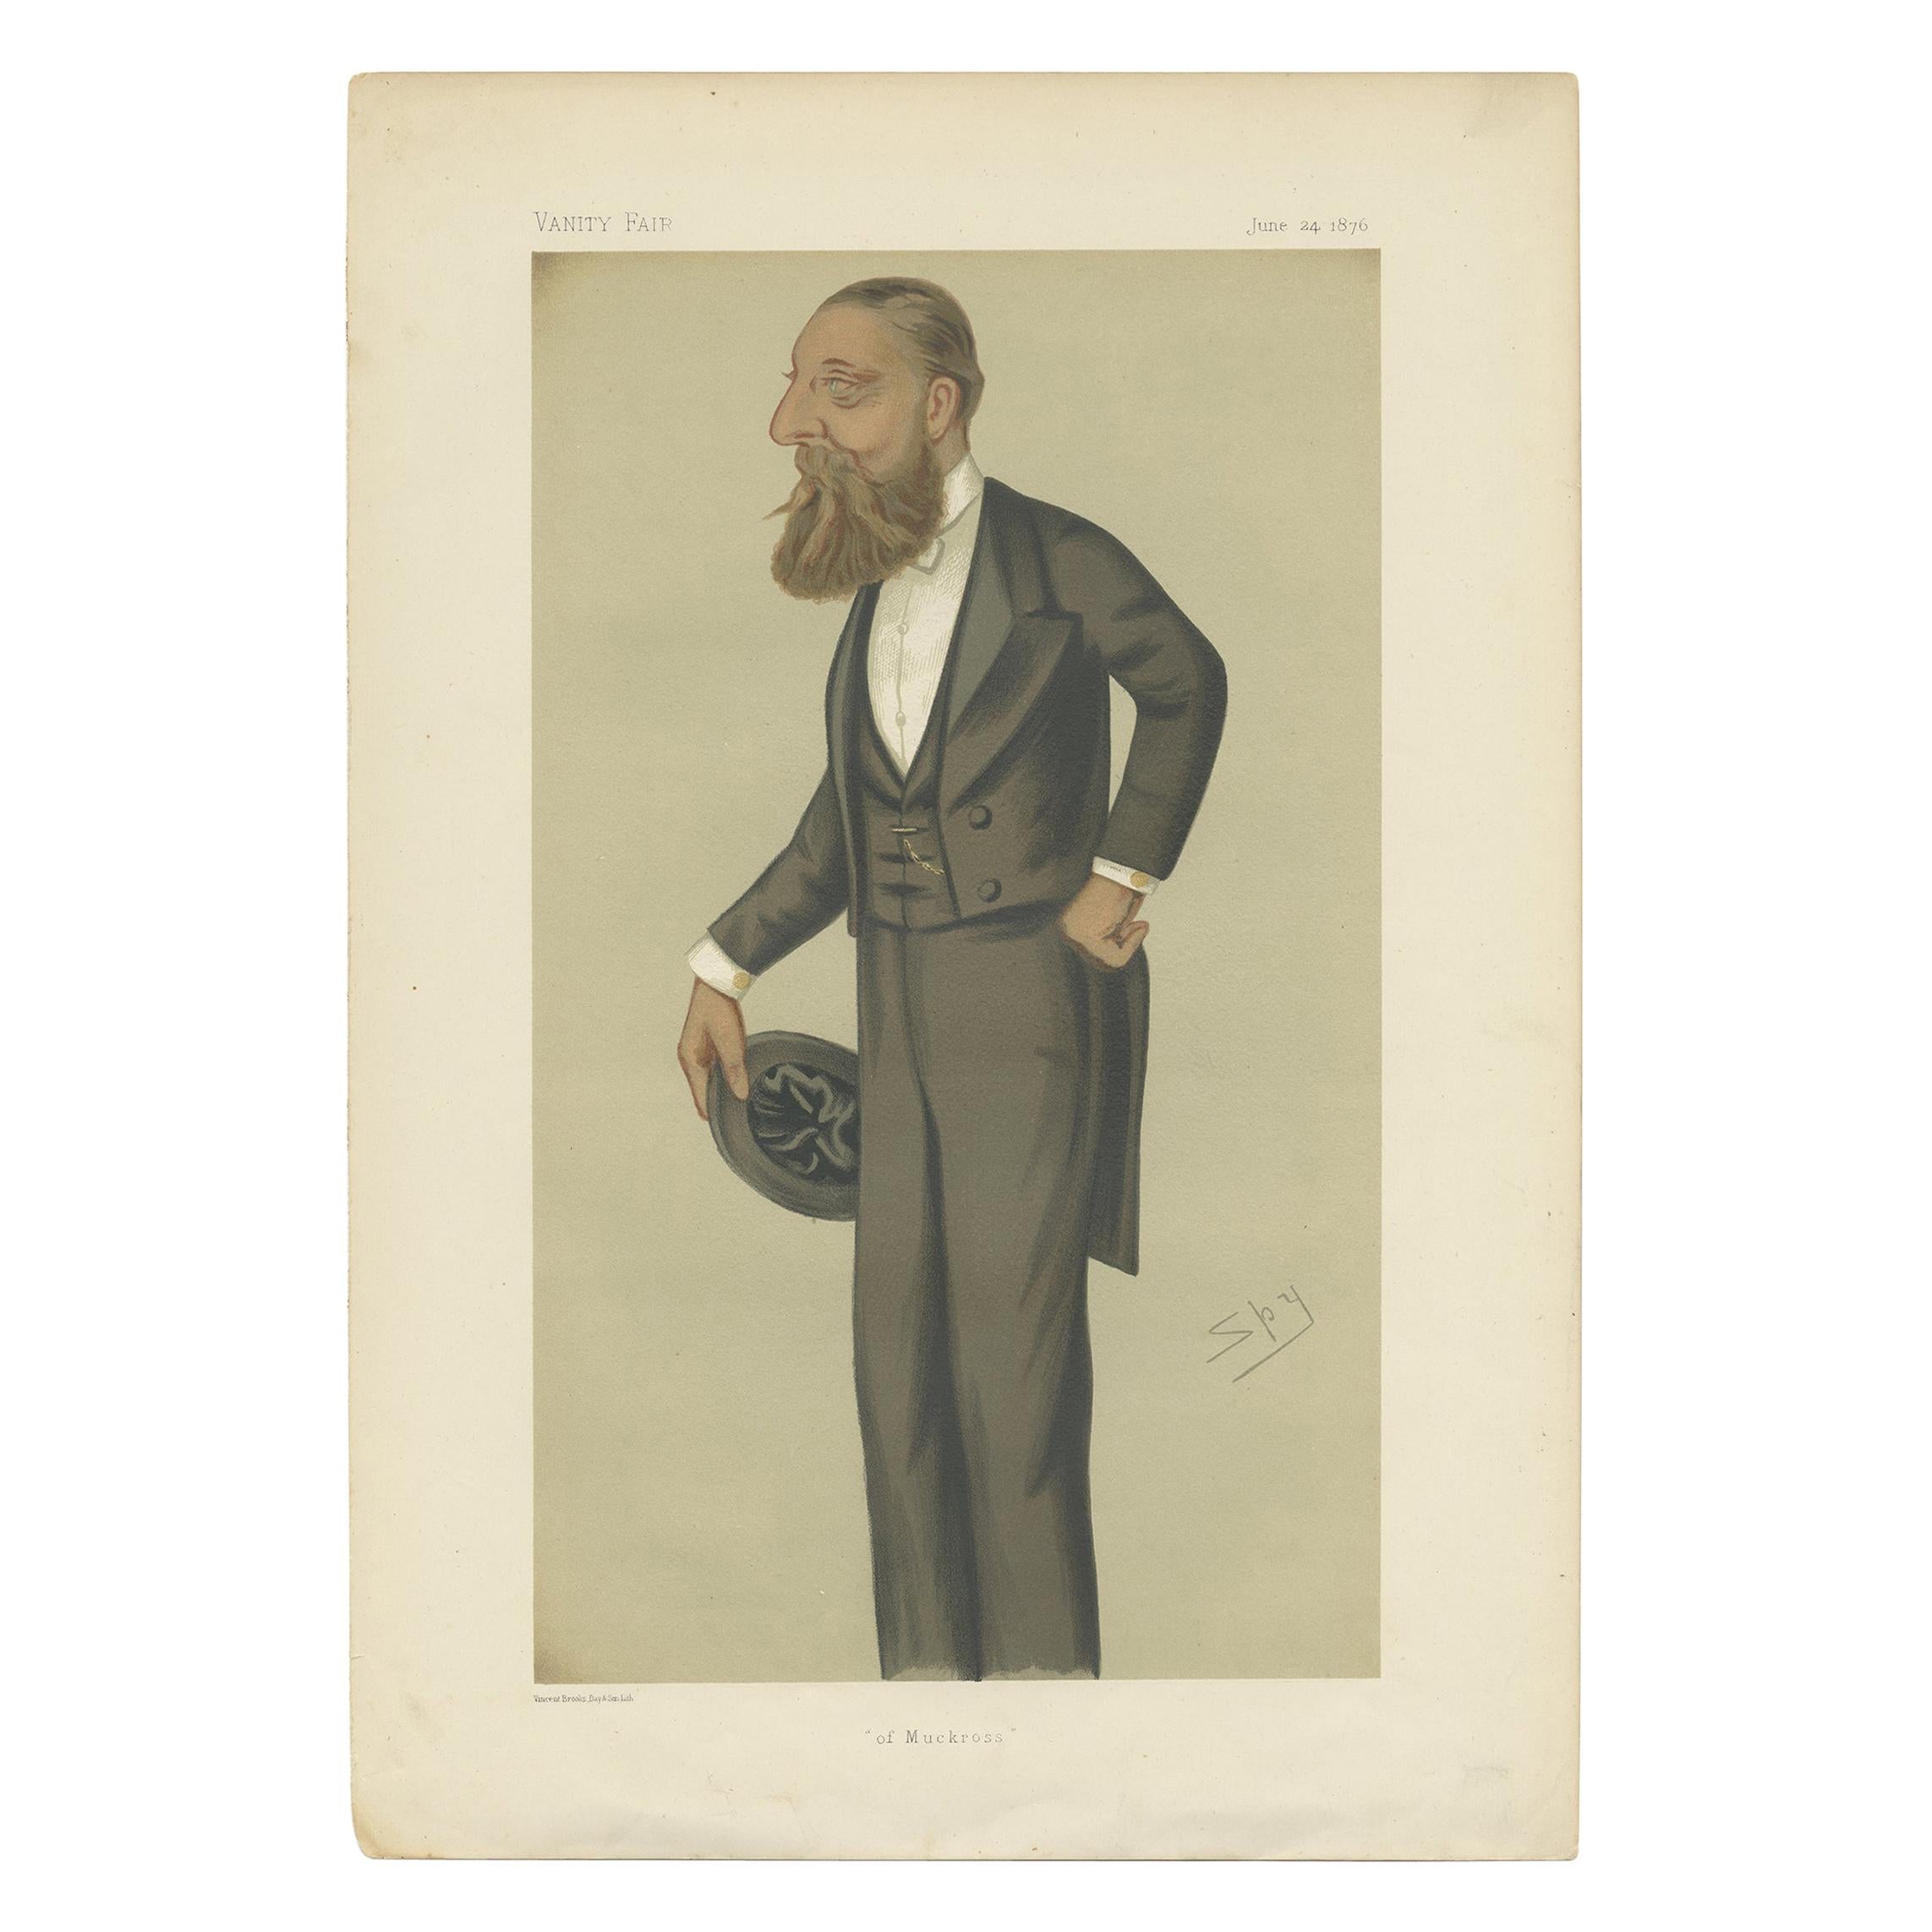 Antique Print of Henry Arthur Herbert Published in the Vanity Fair, 1876